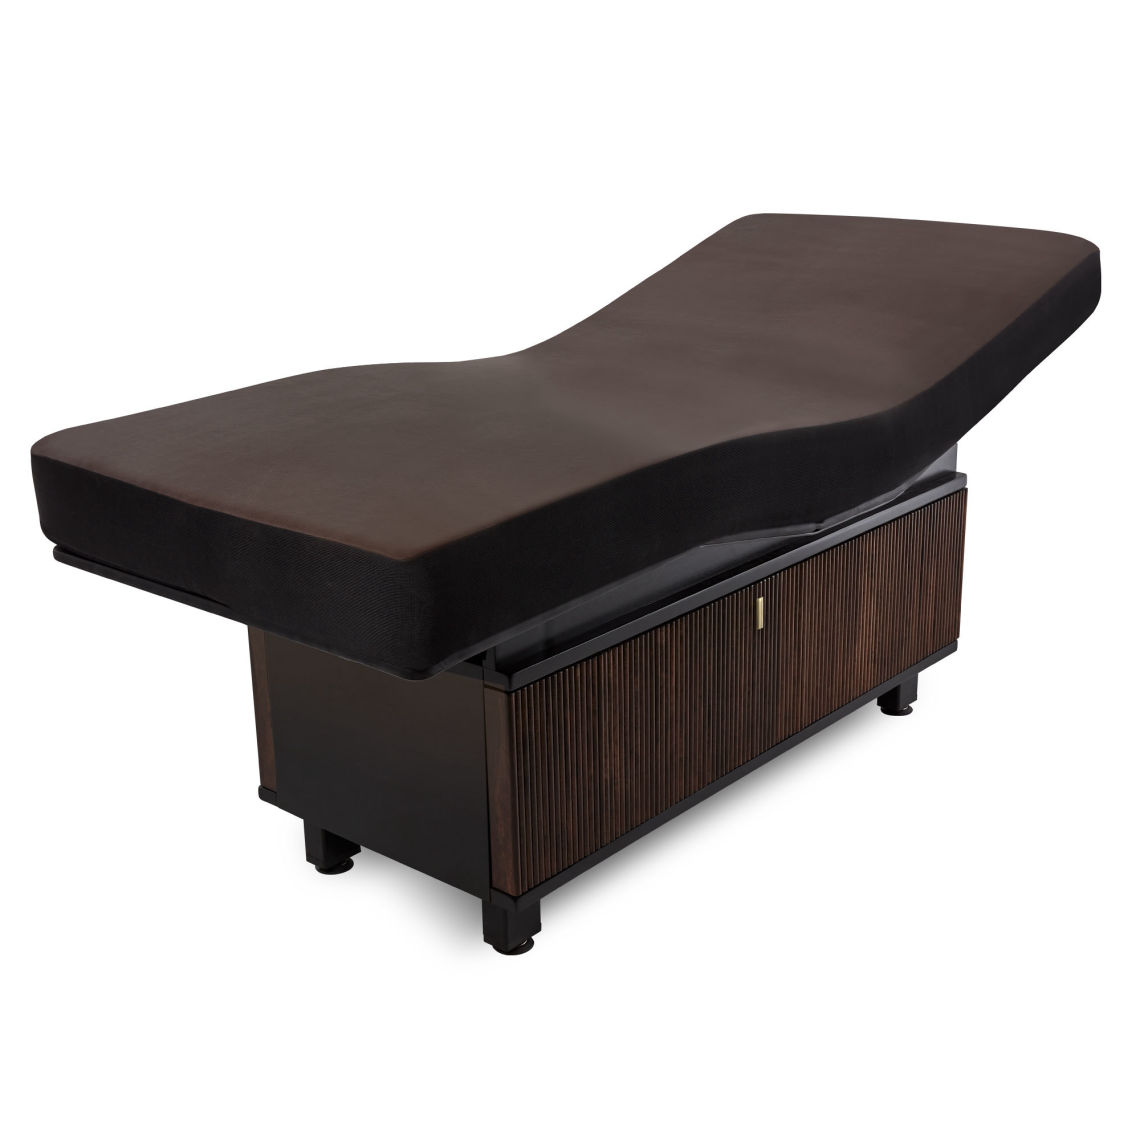 Insignia Waverley™ Multi-purpose treatment table with replaceable mattress